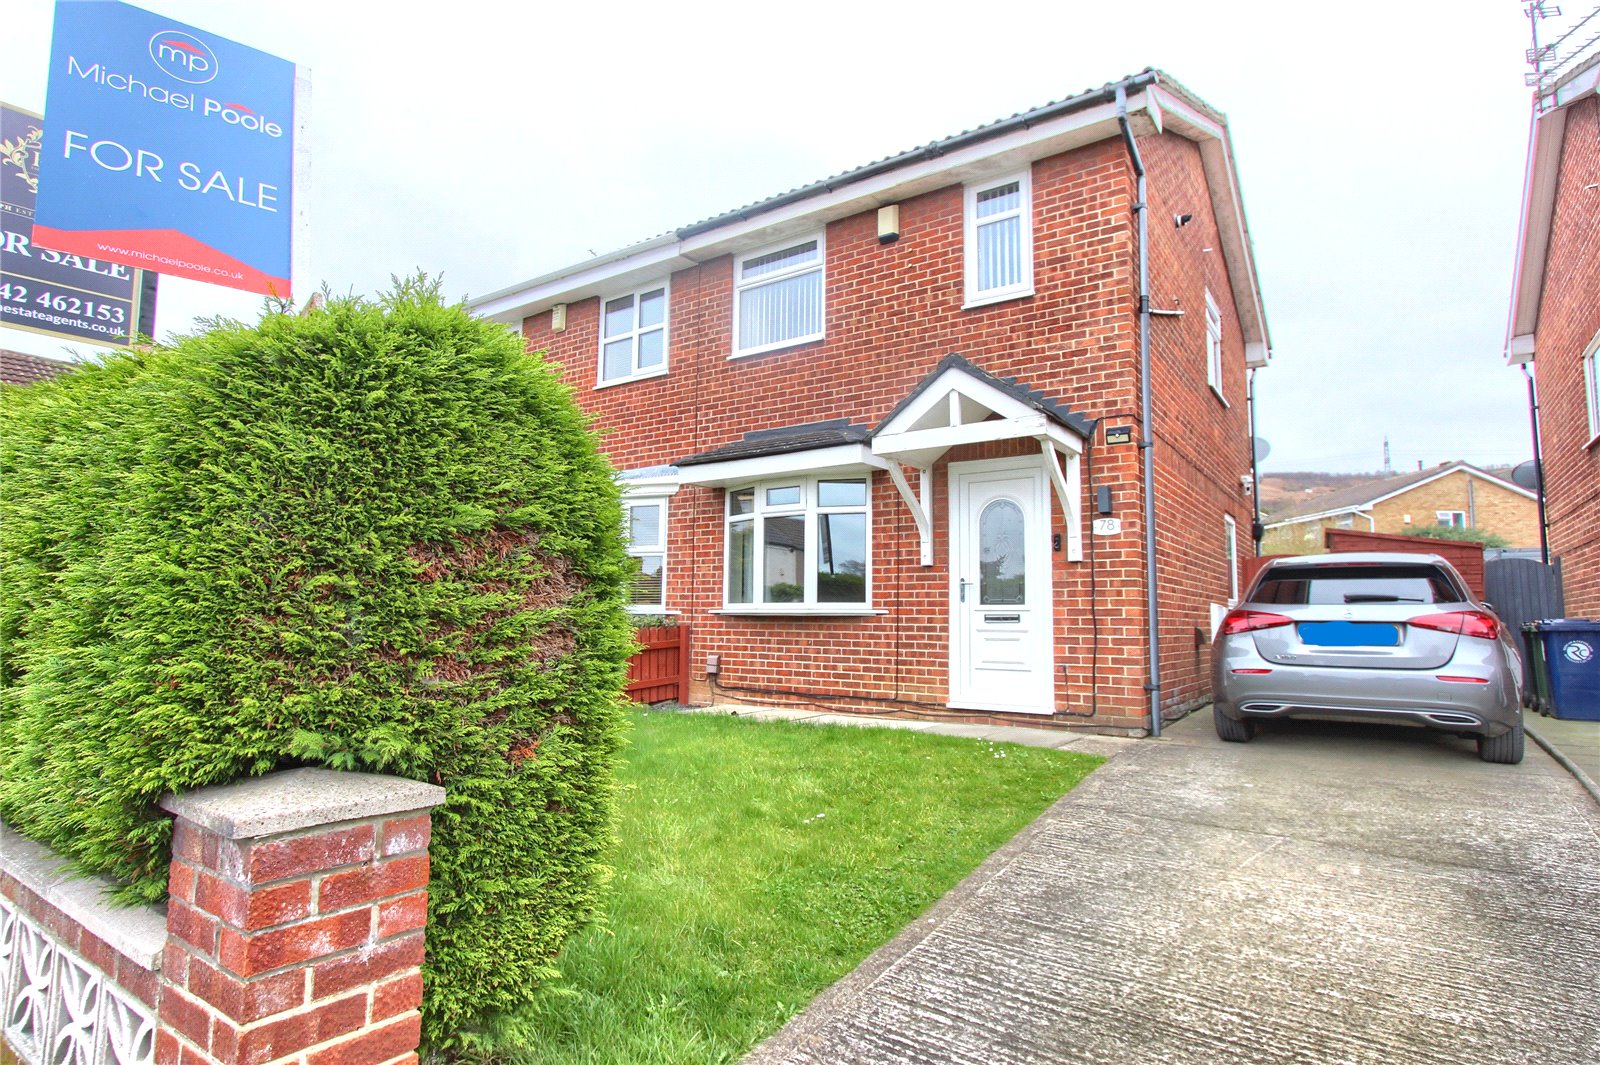 2 bed house for sale in Guisborough Street, Eston - Property Image 1